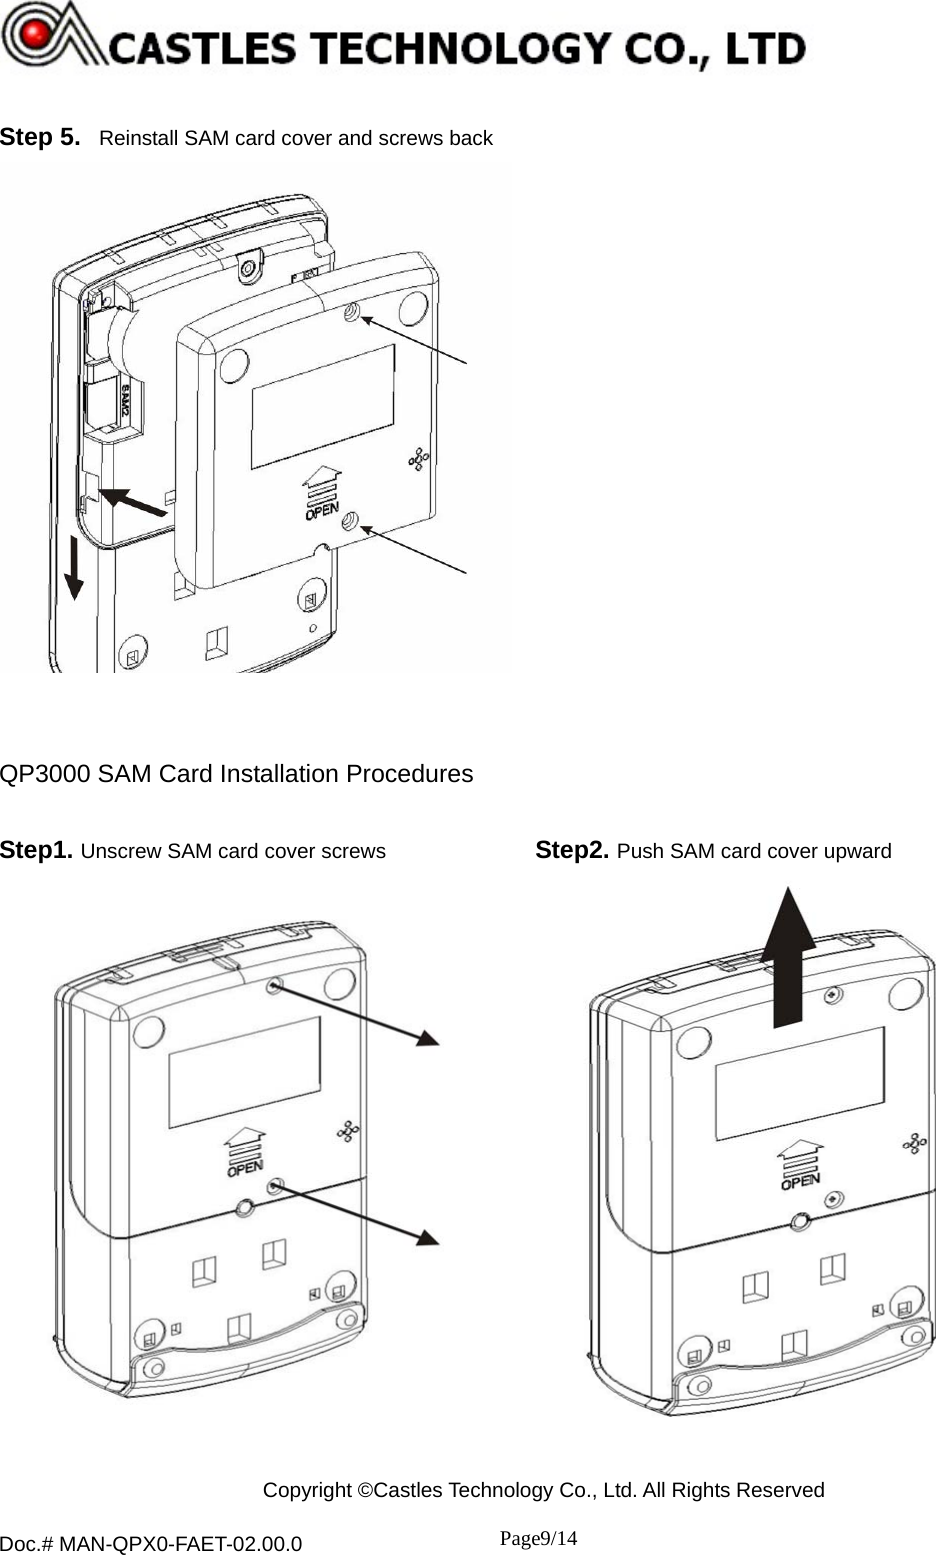  Copyright ©Castles Technology Co., Ltd. All Rights Reserved  Doc.# MAN-QPX0-FAET-02.00.0               Page9/14     Step 5.  Reinstall SAM card cover and screws back     QP3000 SAM Card Installation Procedures  Step1. Unscrew SAM card cover screws Step2. Push SAM card cover upward     